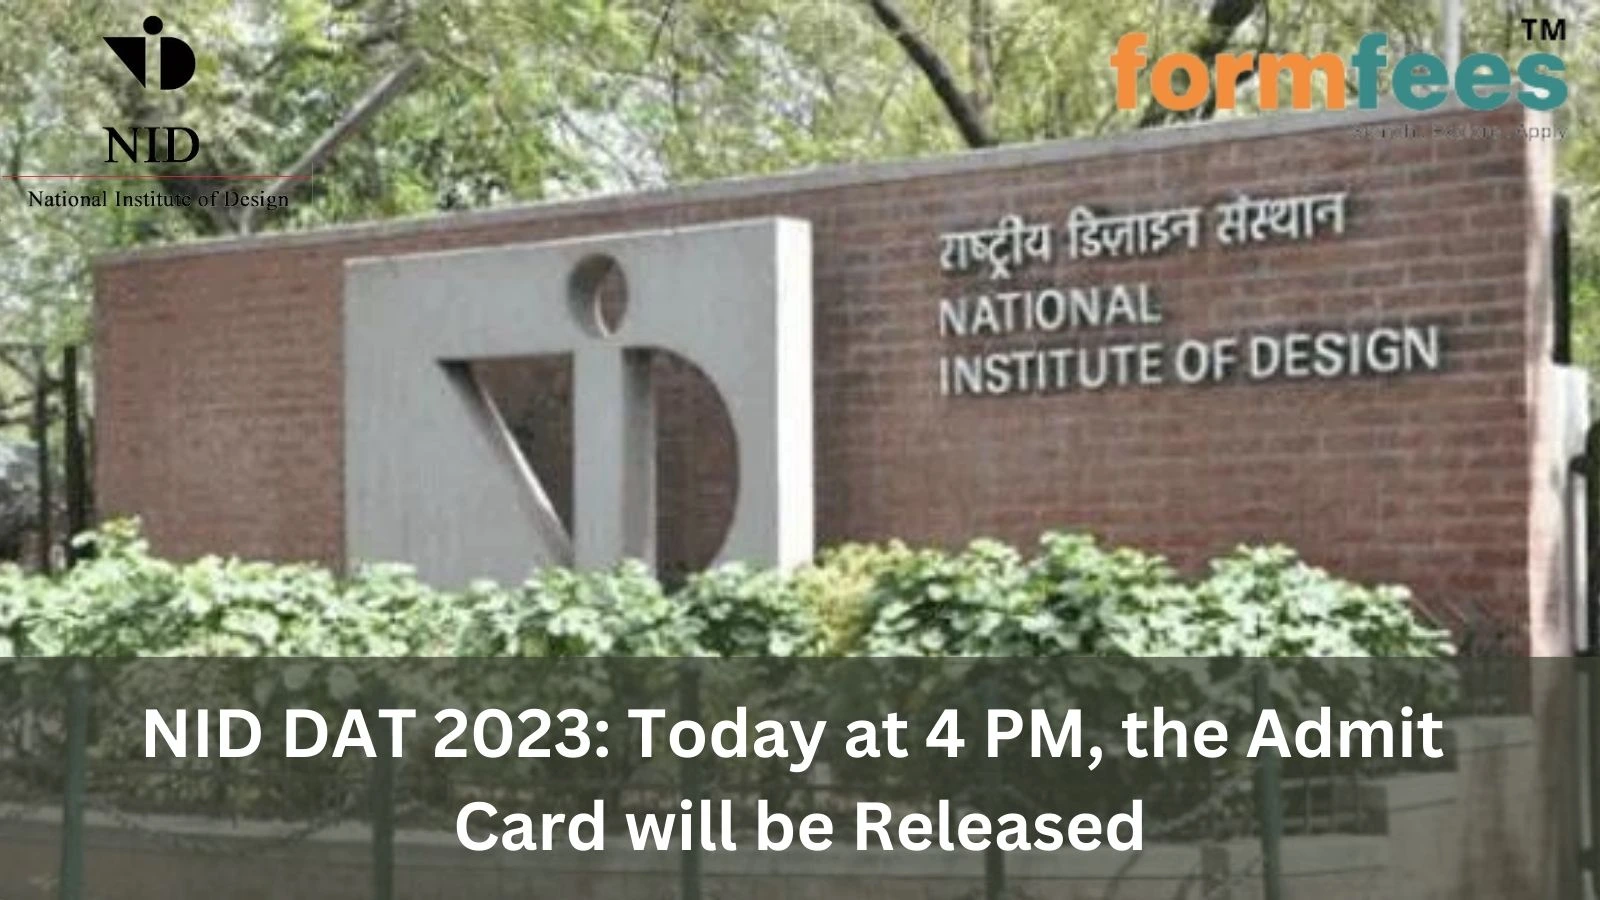 NID DAT 2023: Today at 4 PM, the Admit Card will be Released